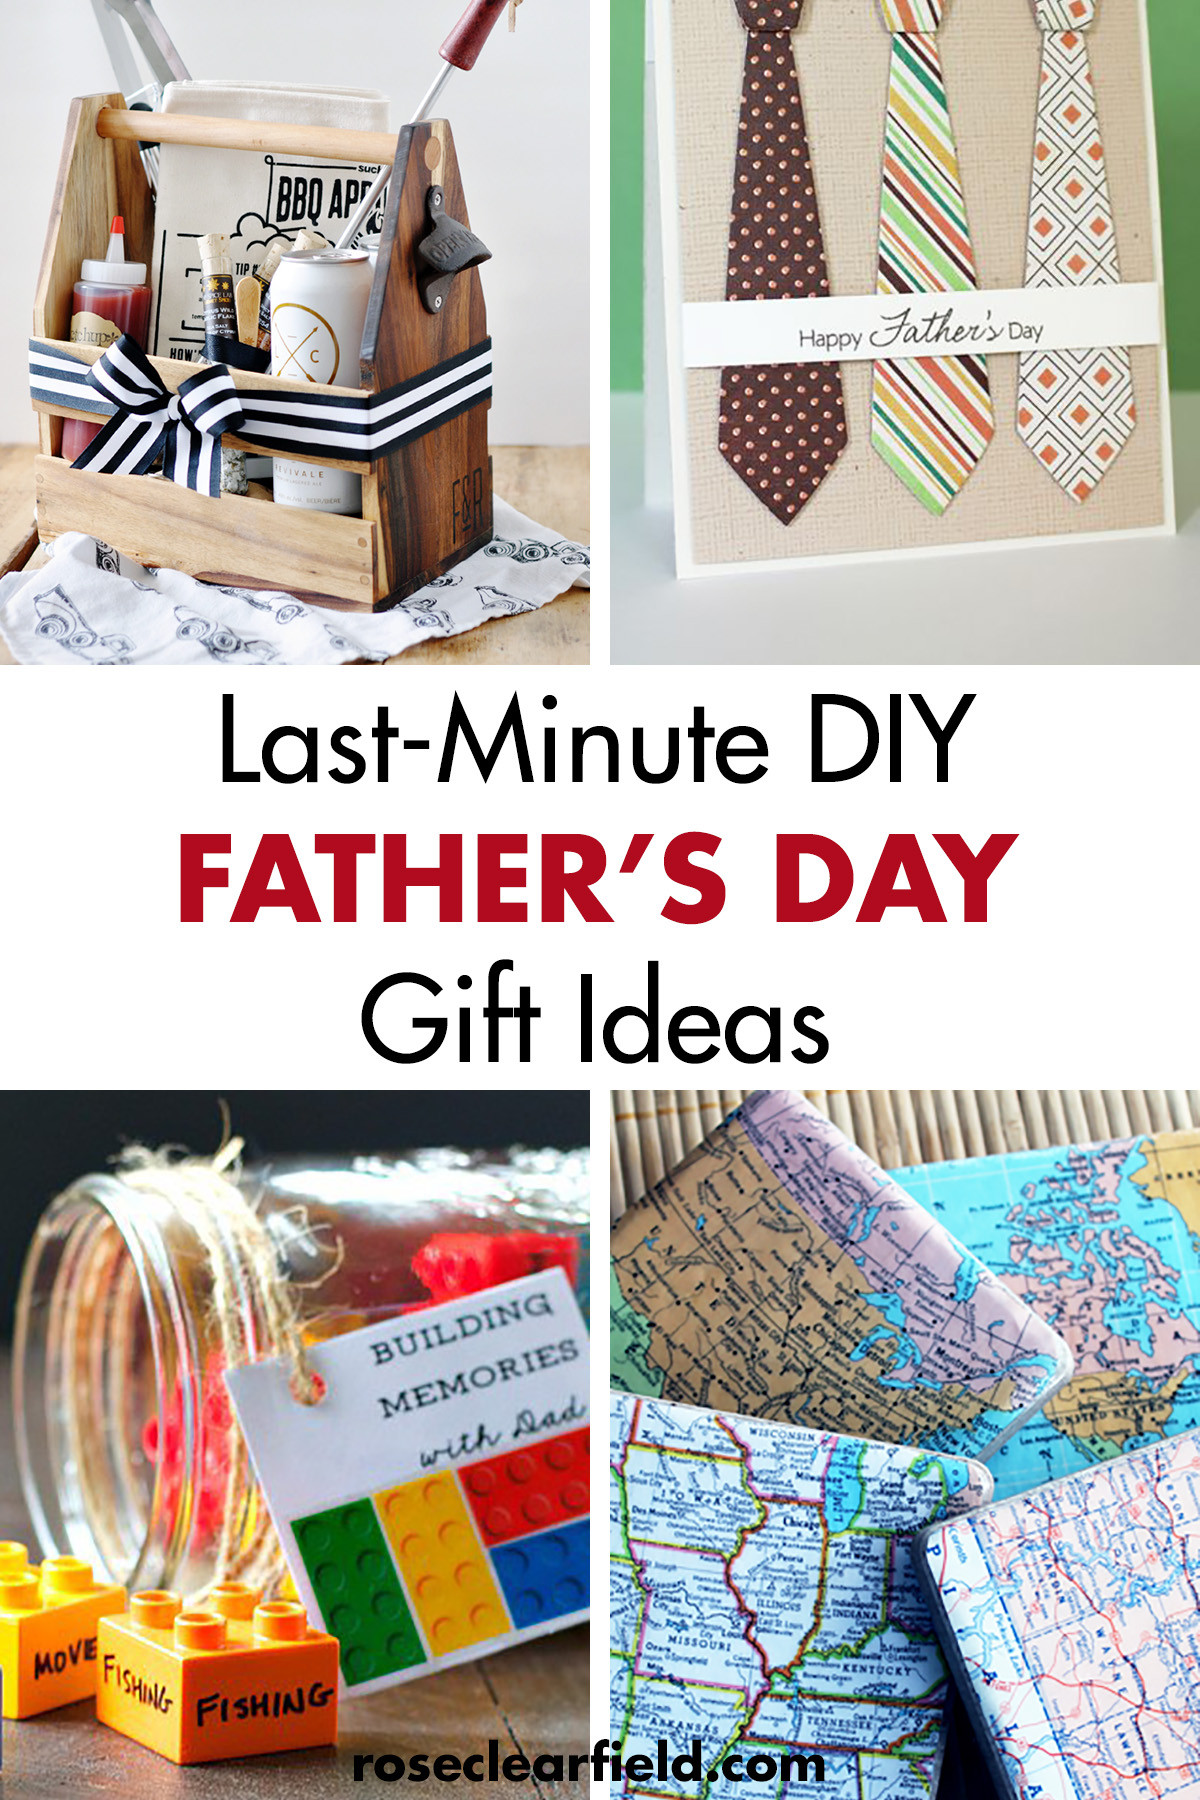 Father'S Day DIY Gift Ideas
 Last Minute DIY Father s Day Gift Ideas • Rose Clearfield